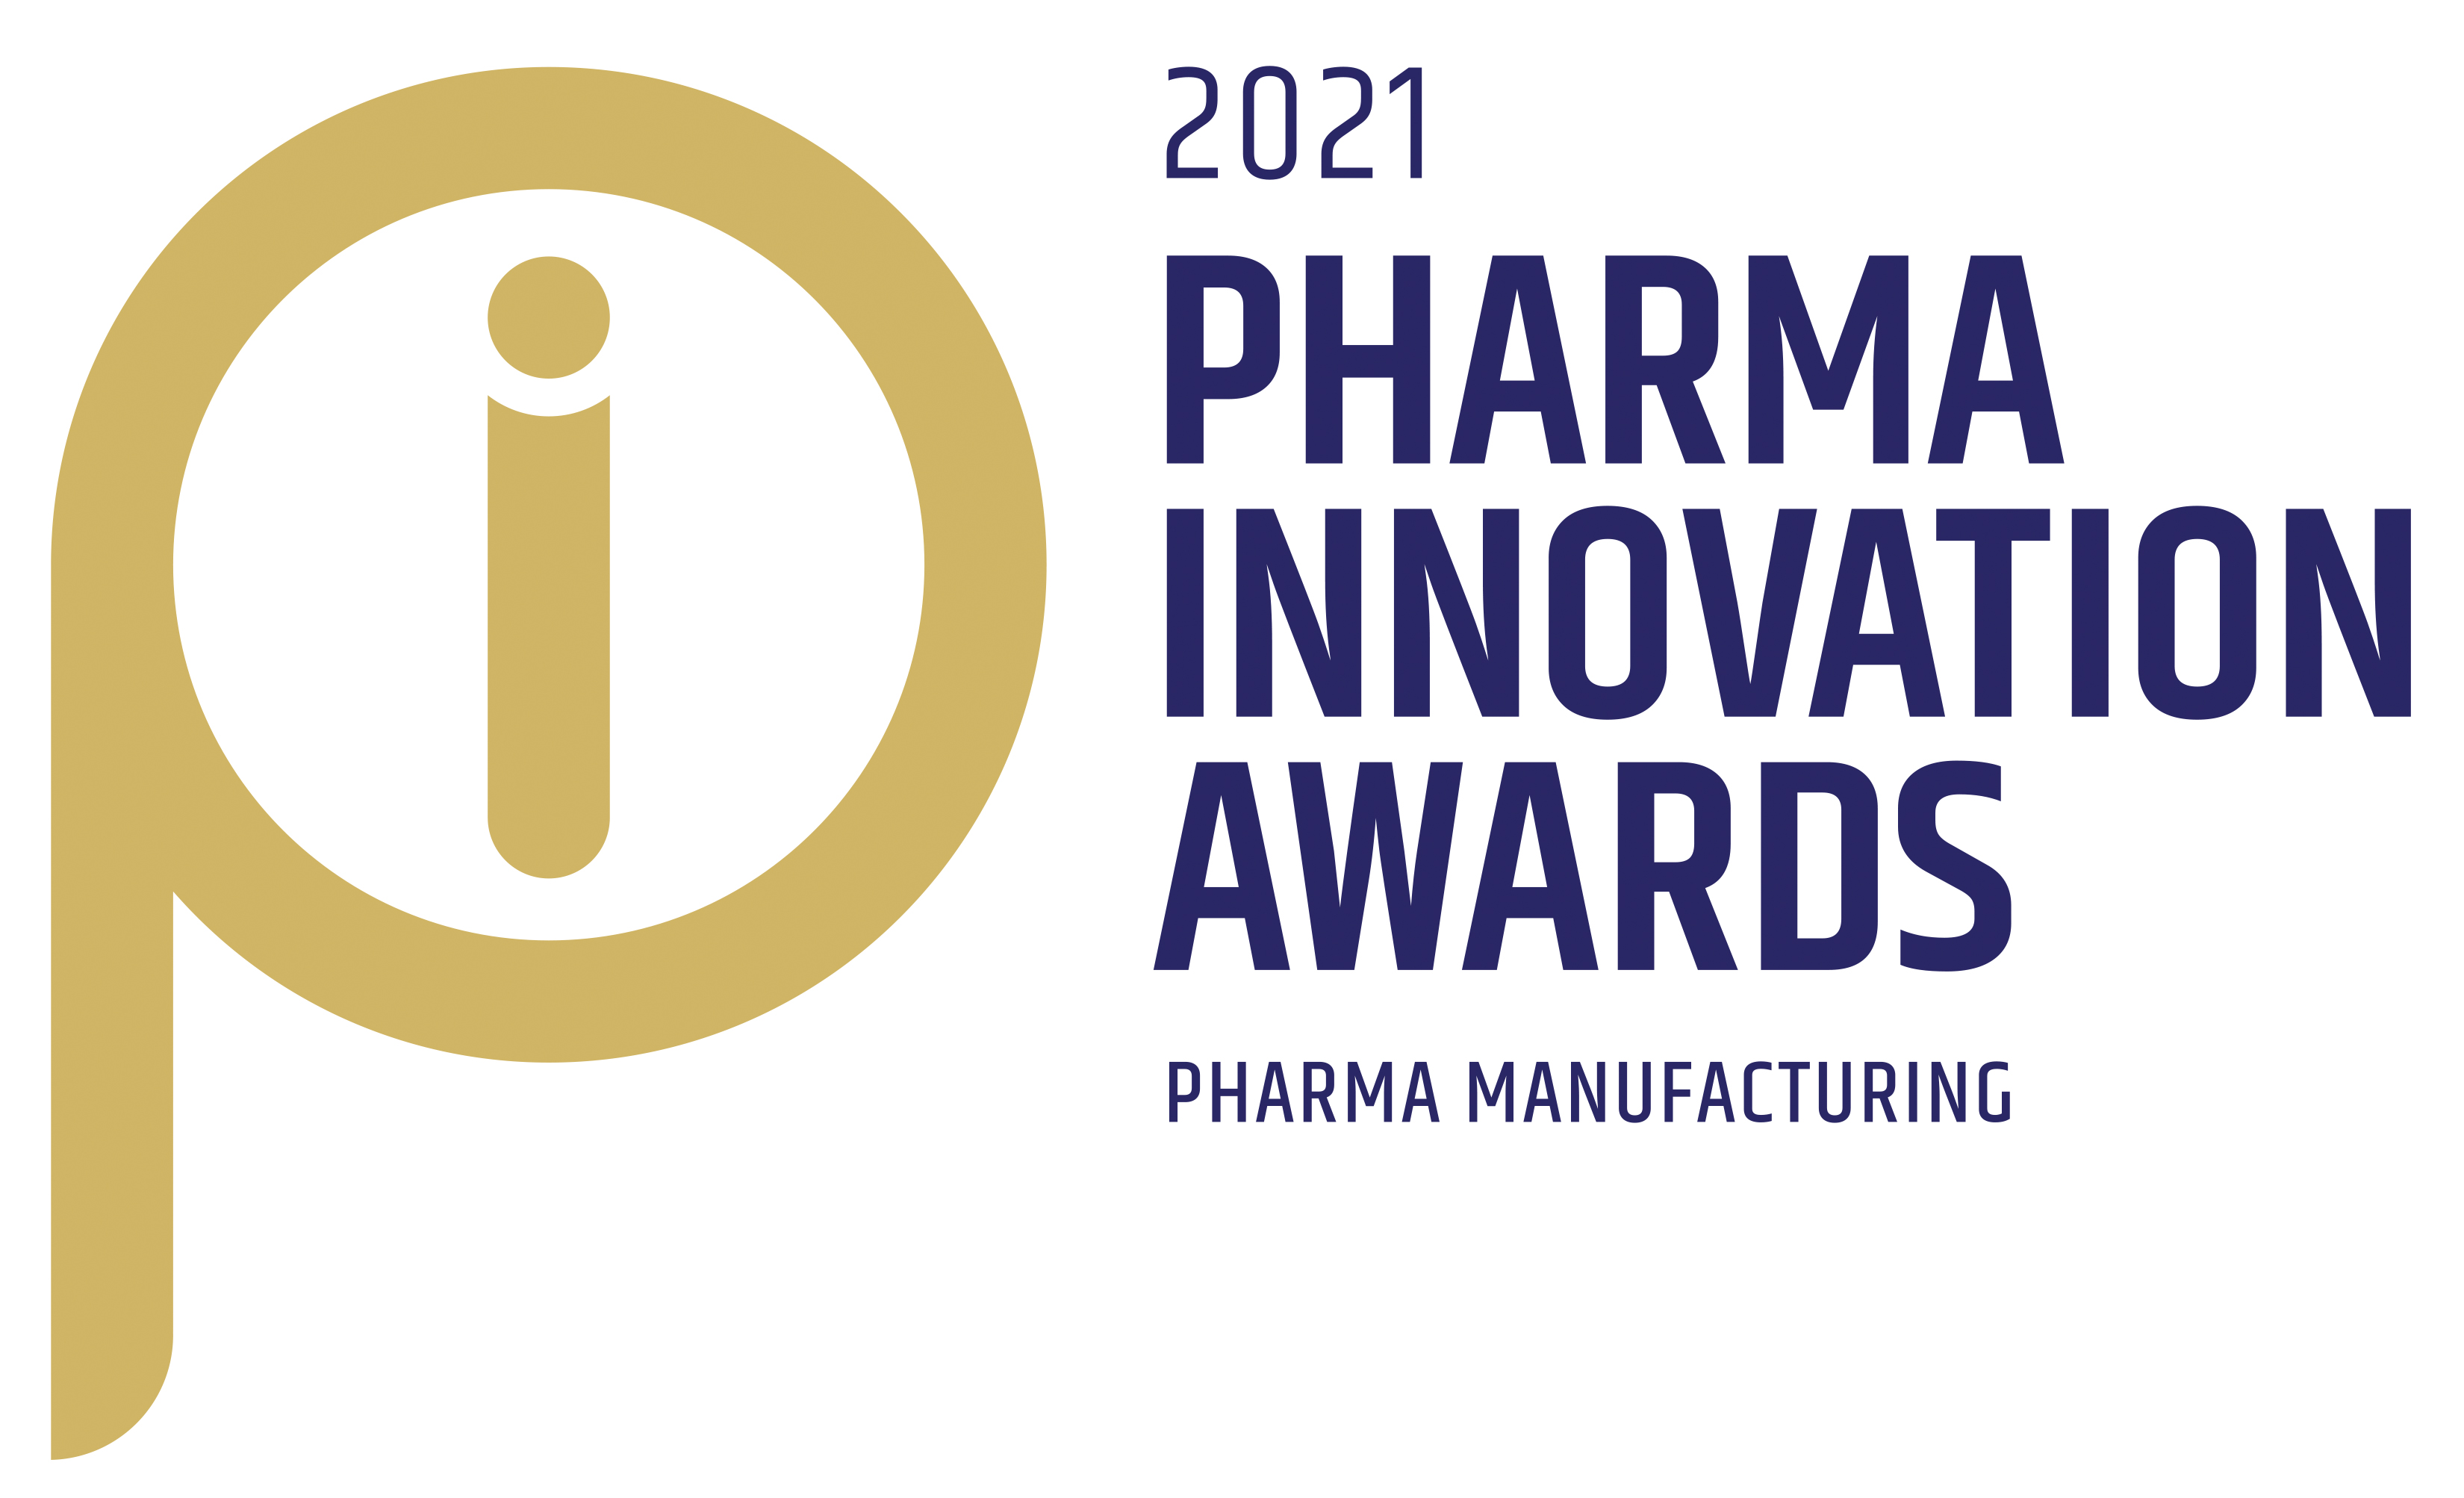 Optimal Industrial Technologies’ Process Analytical Technology (PAT) knowledge management software, synTQ, received the 2021 Pharma Innovation Award for quality control - holistic quality management.